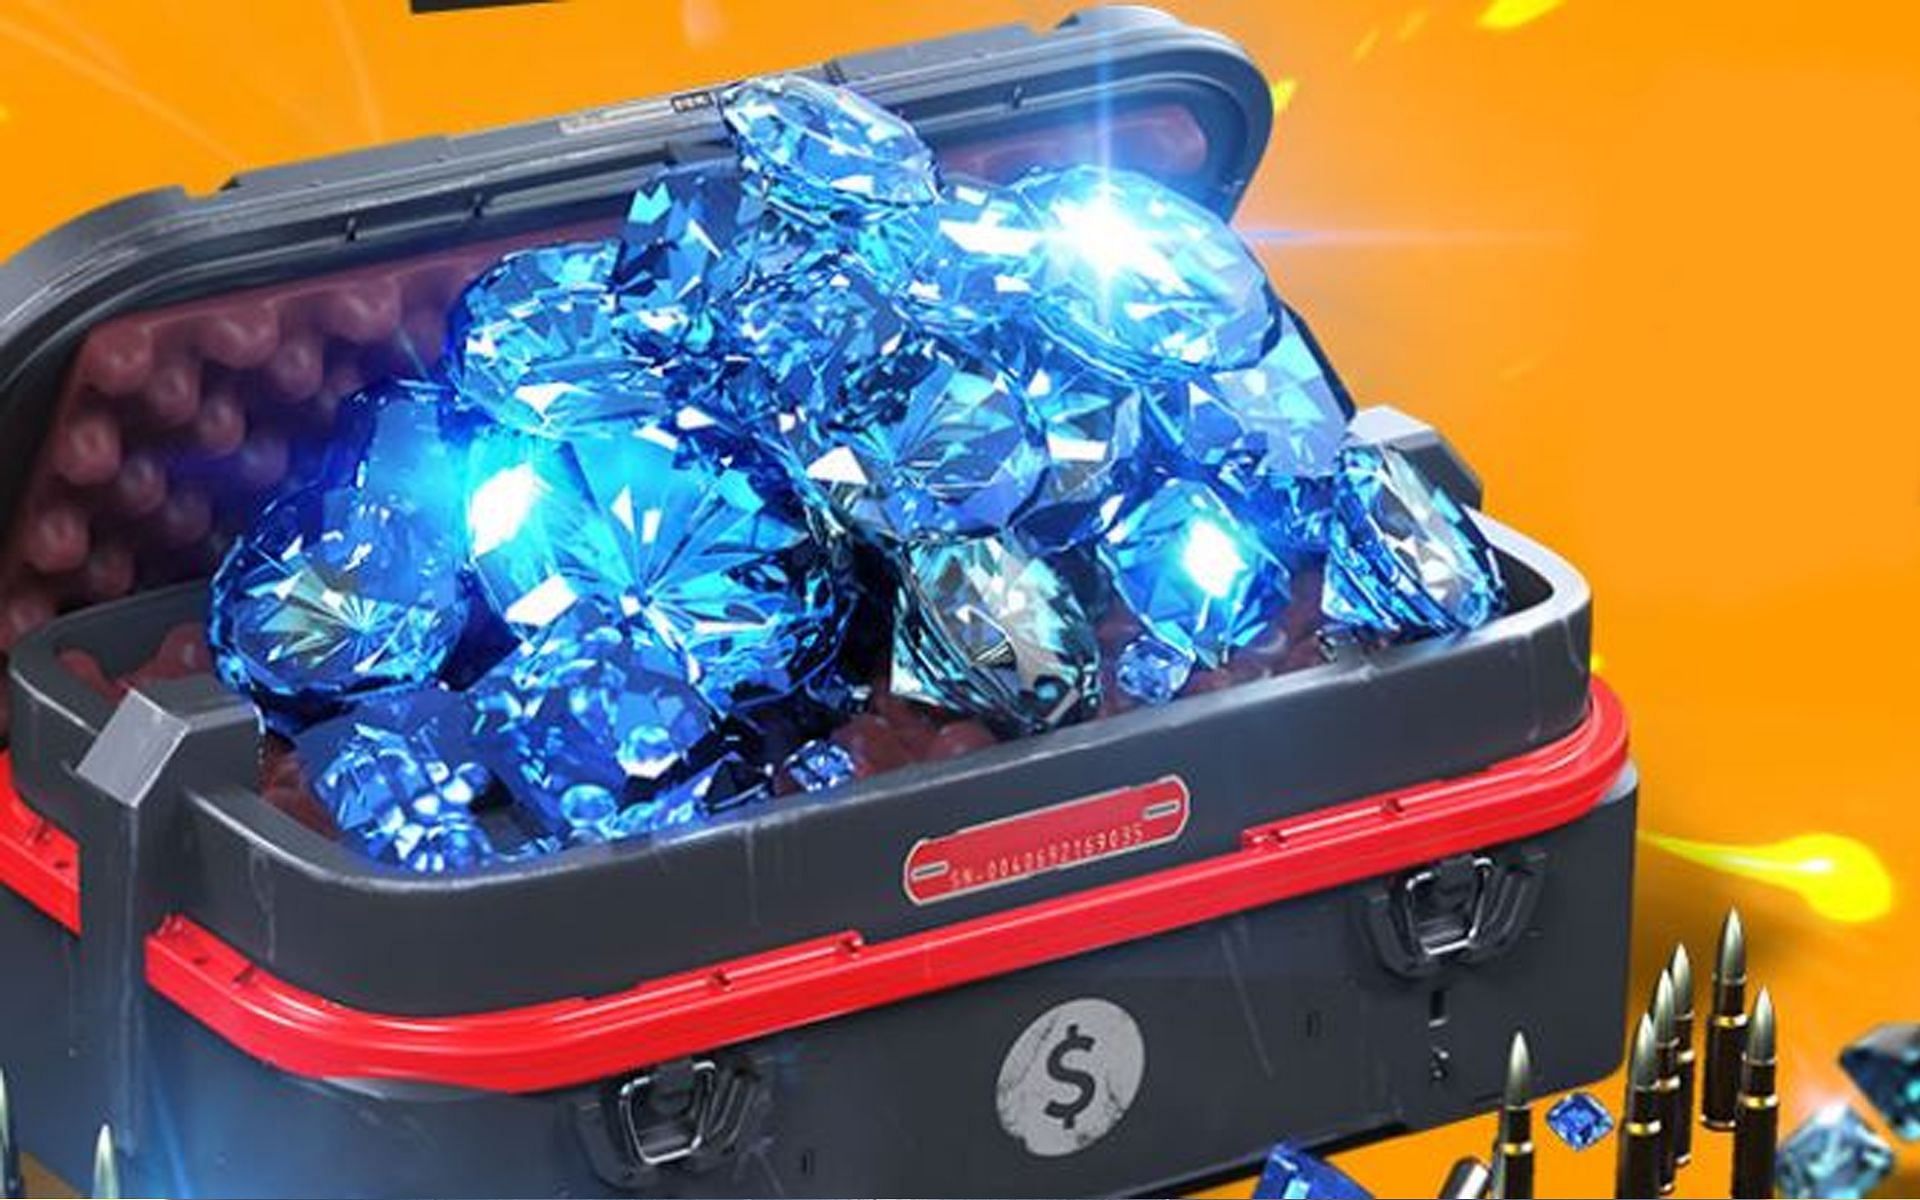  A screenshot of a Free Fire event showing a box full of diamonds, which are the in-game currency that can be used to purchase items.